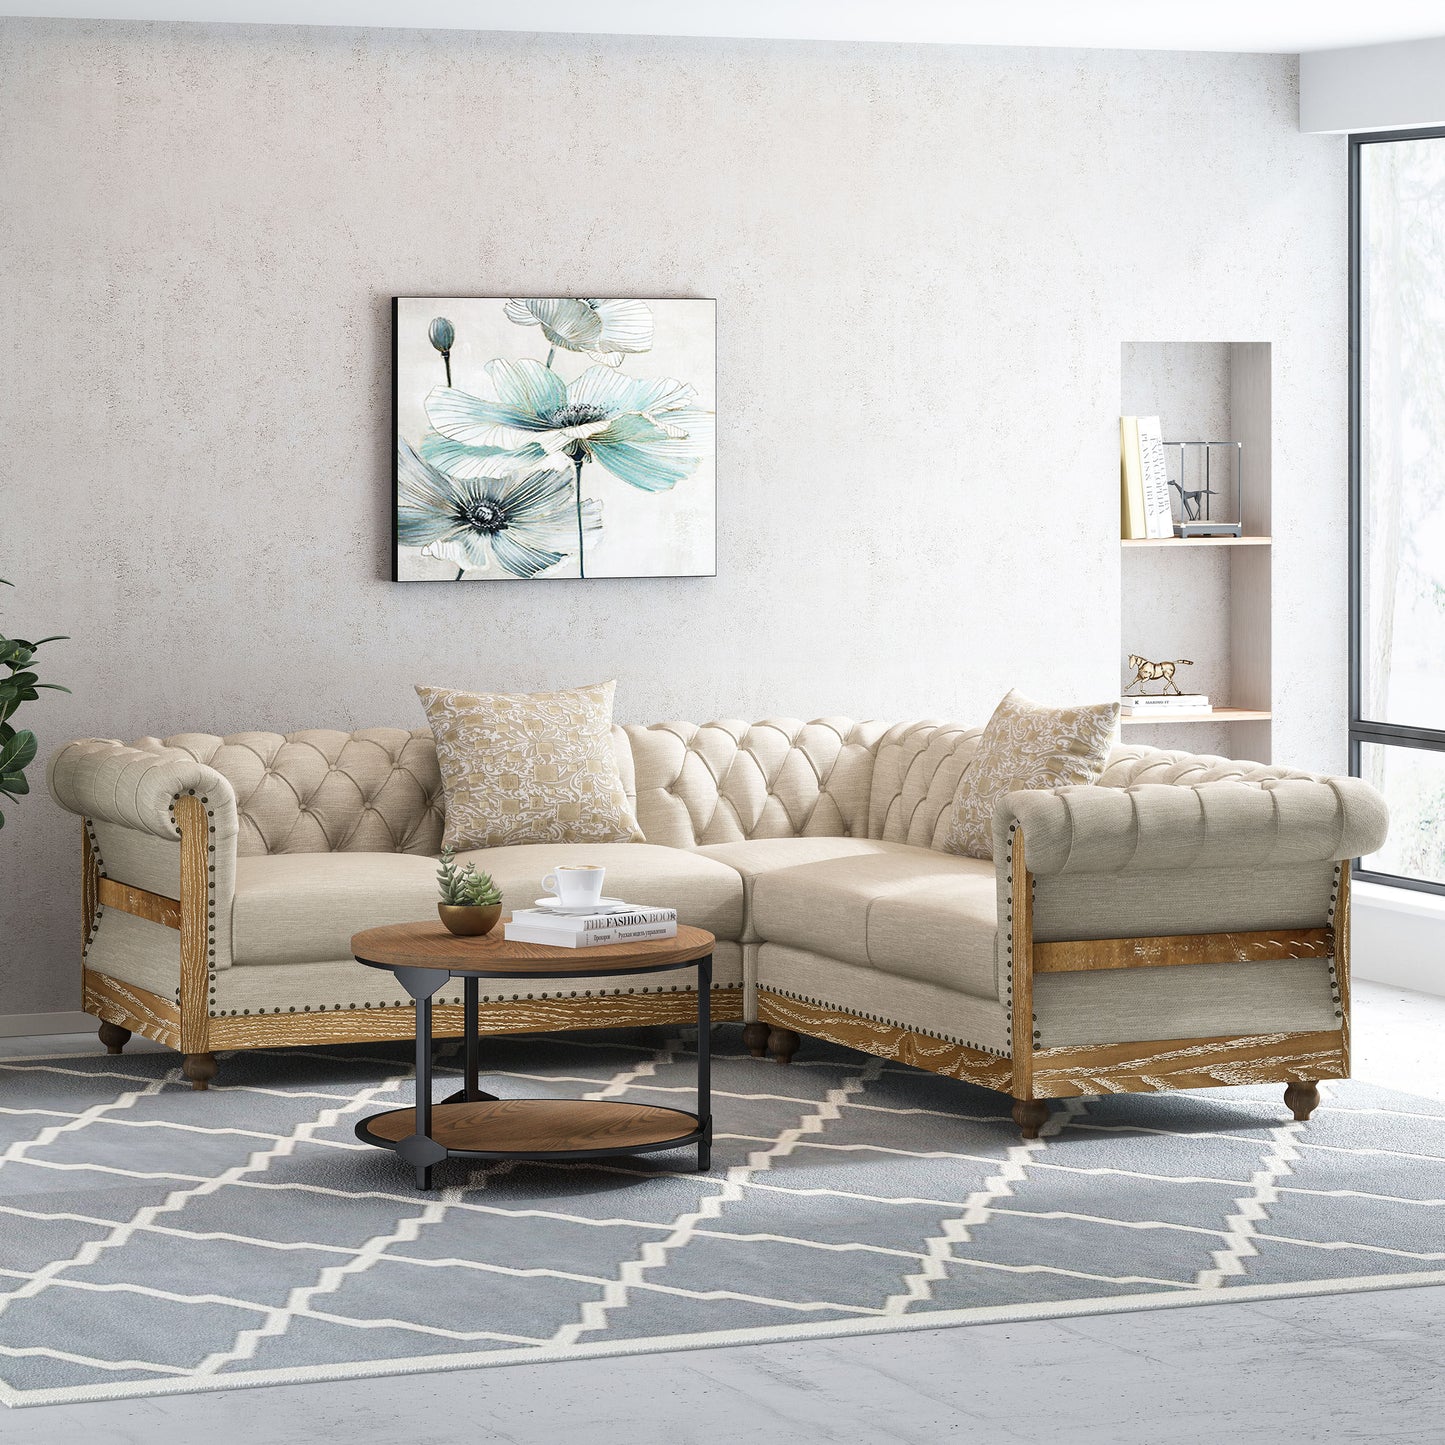 Alejandro Chesterfield Tufted Fabric 5 Seater Sectional Sofa with Nailhead Trim